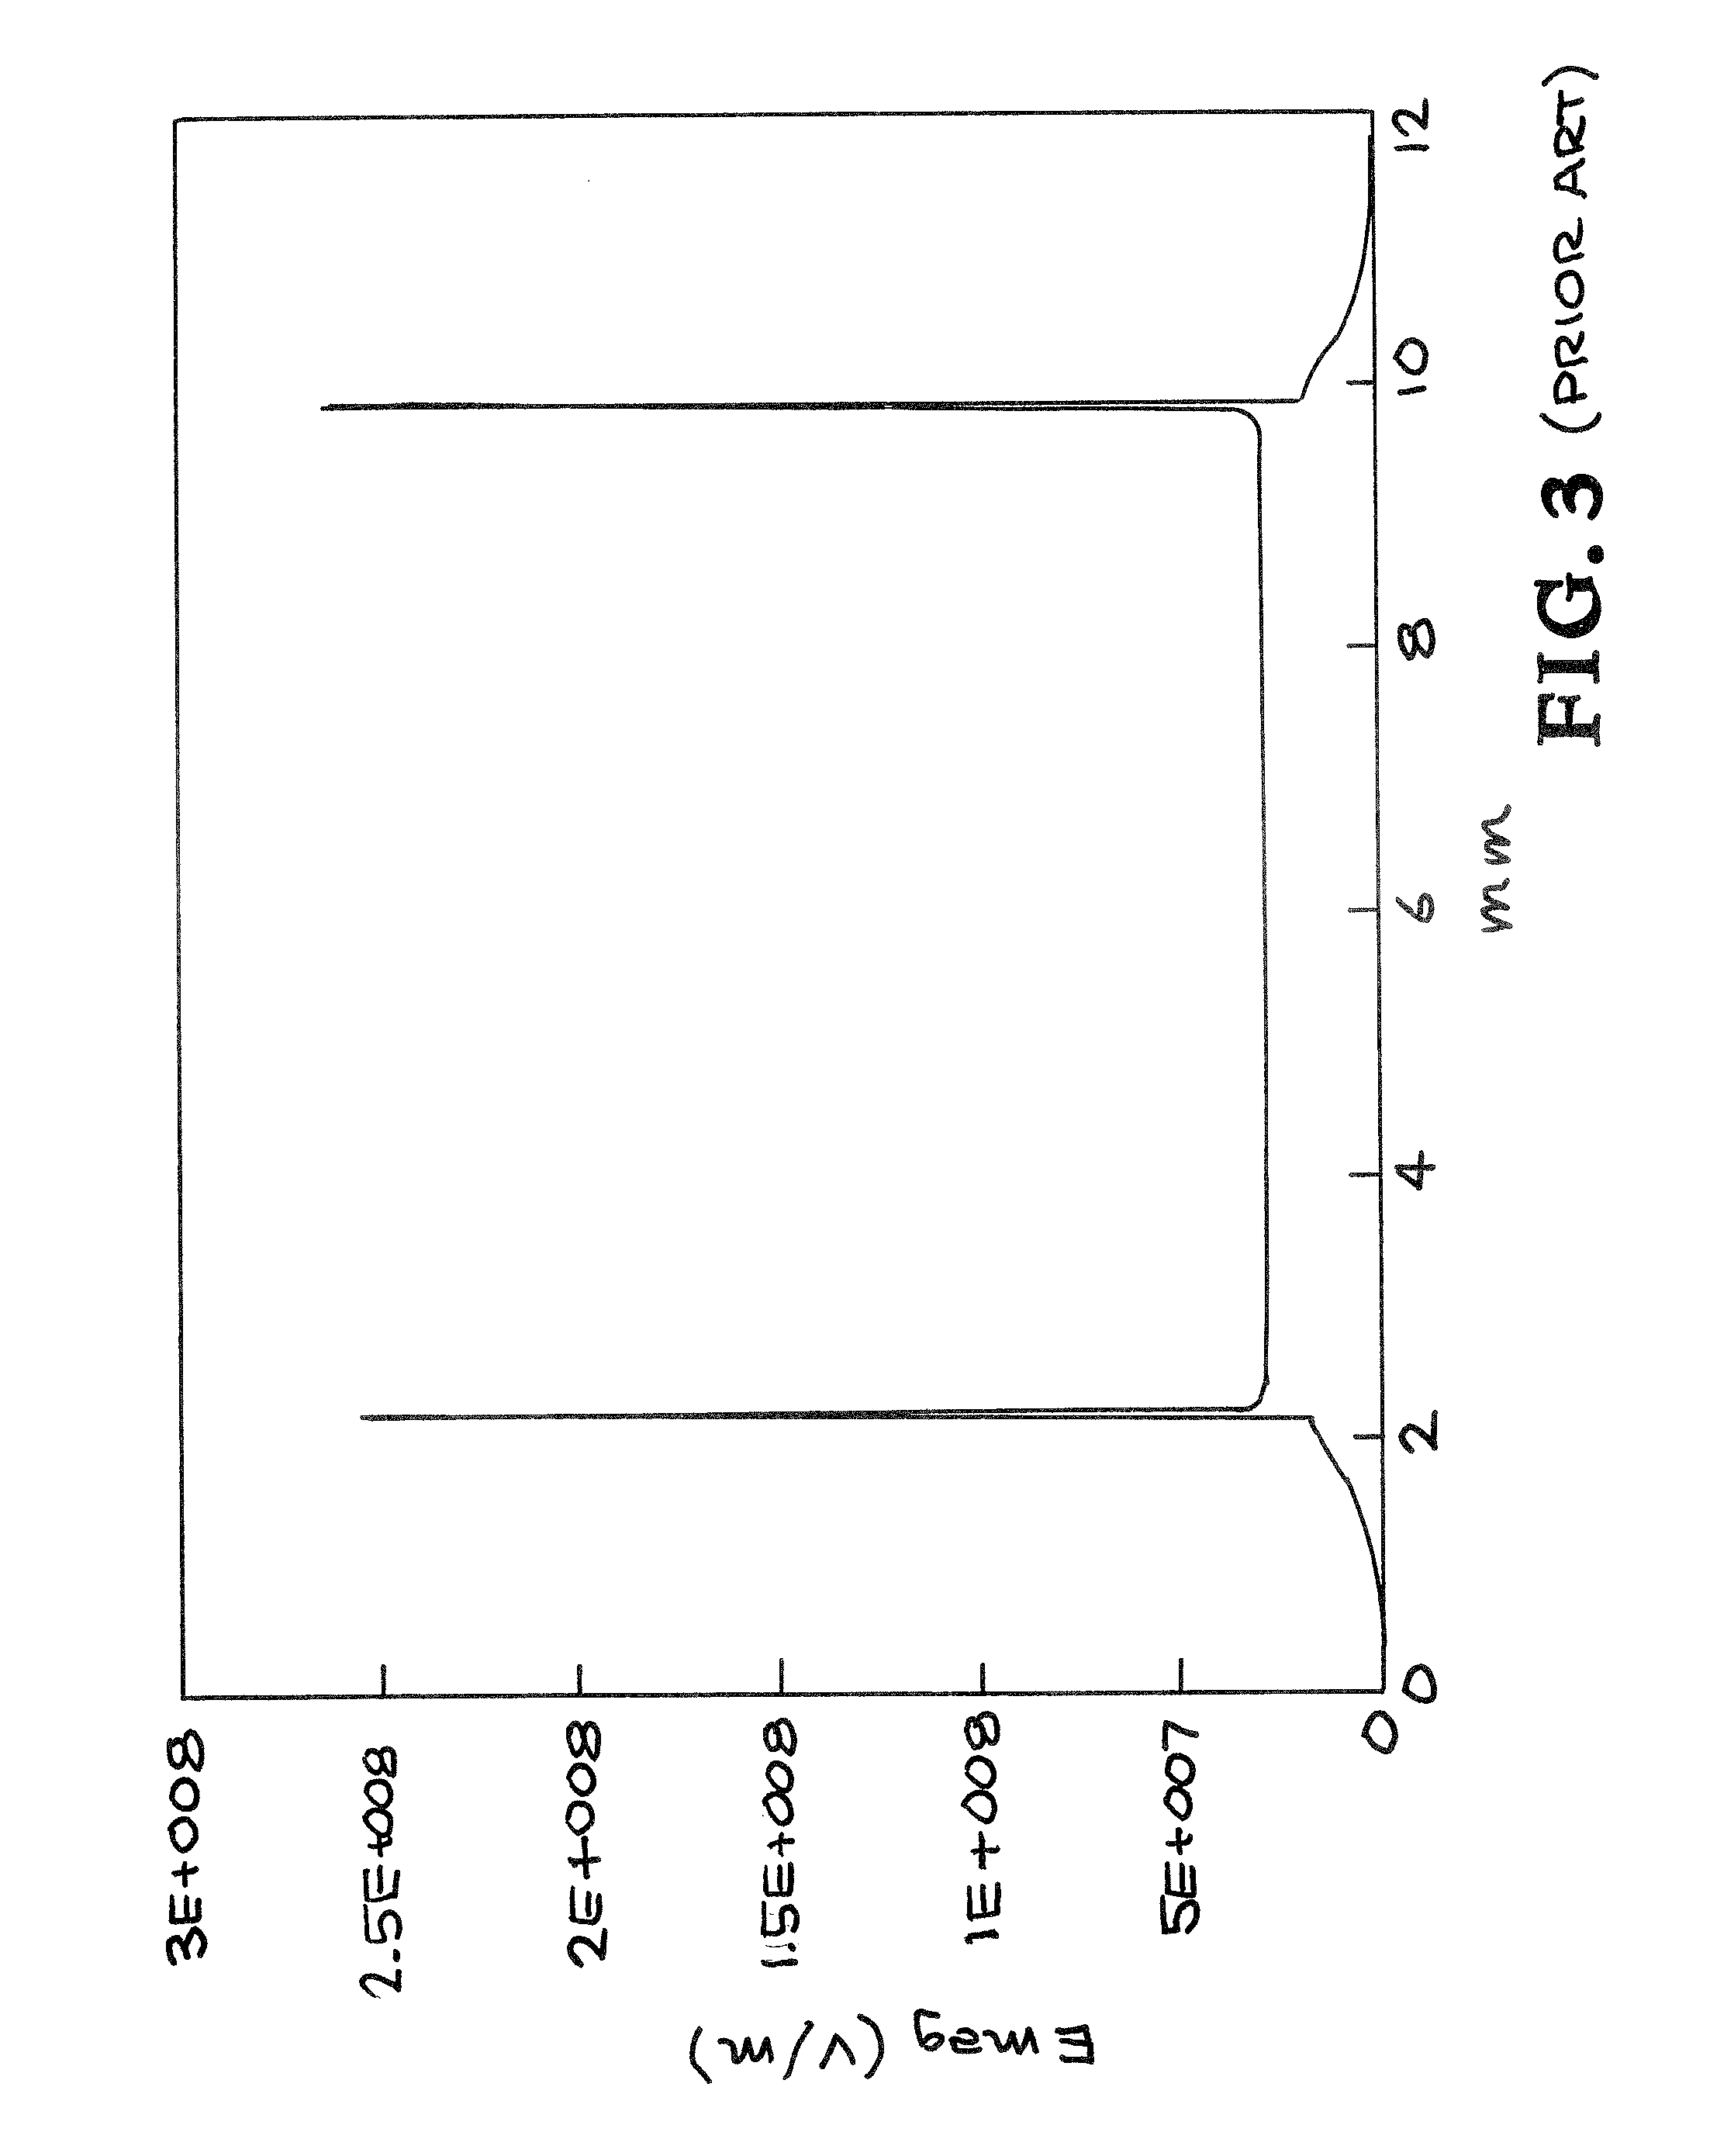 Optically-initiated silicon carbide high voltage switch with contoured-profile electrode interfaces